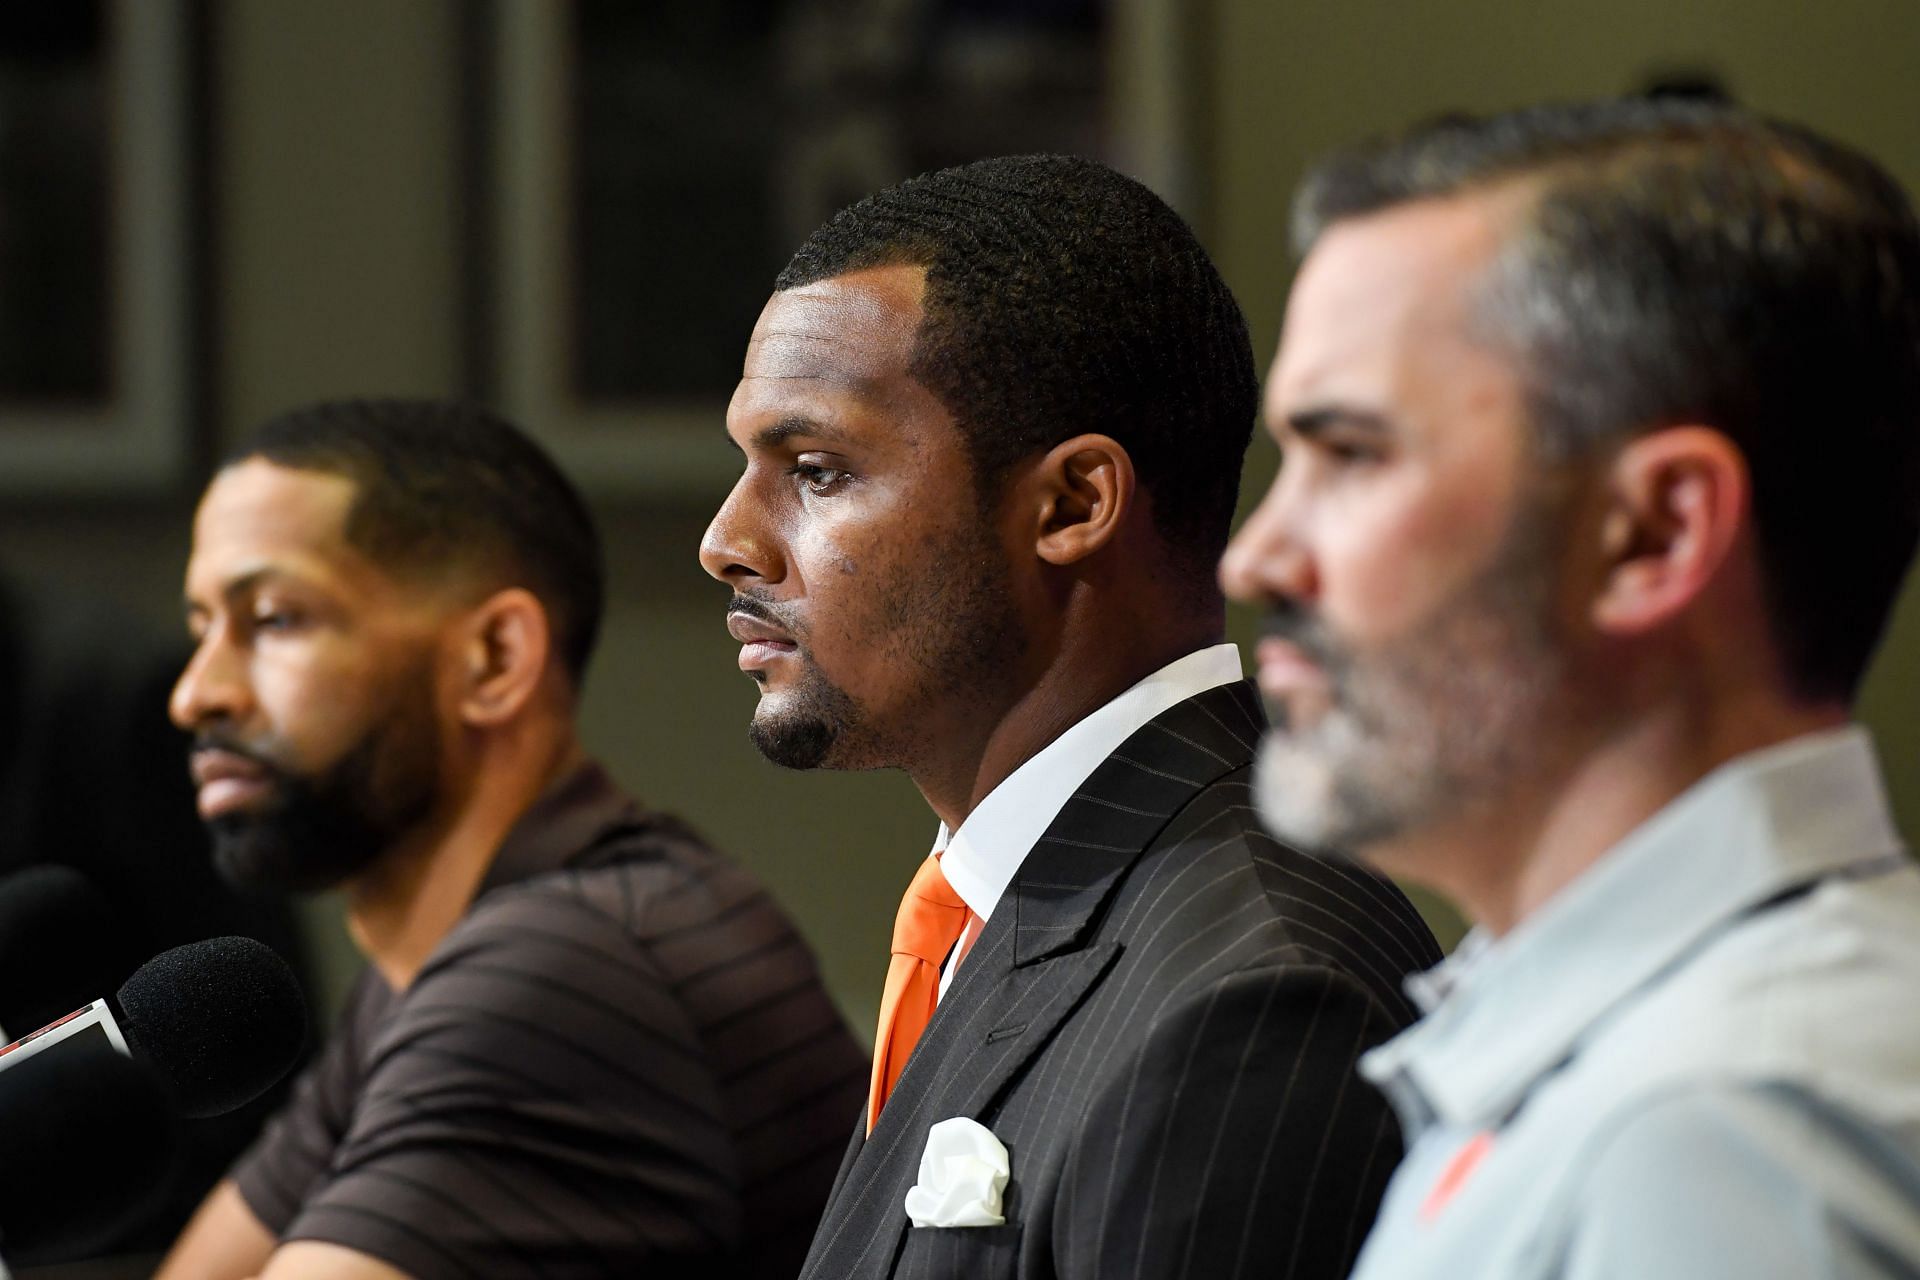 Deshaun Watson is back in the public eye after an HBO interview with his accusers.